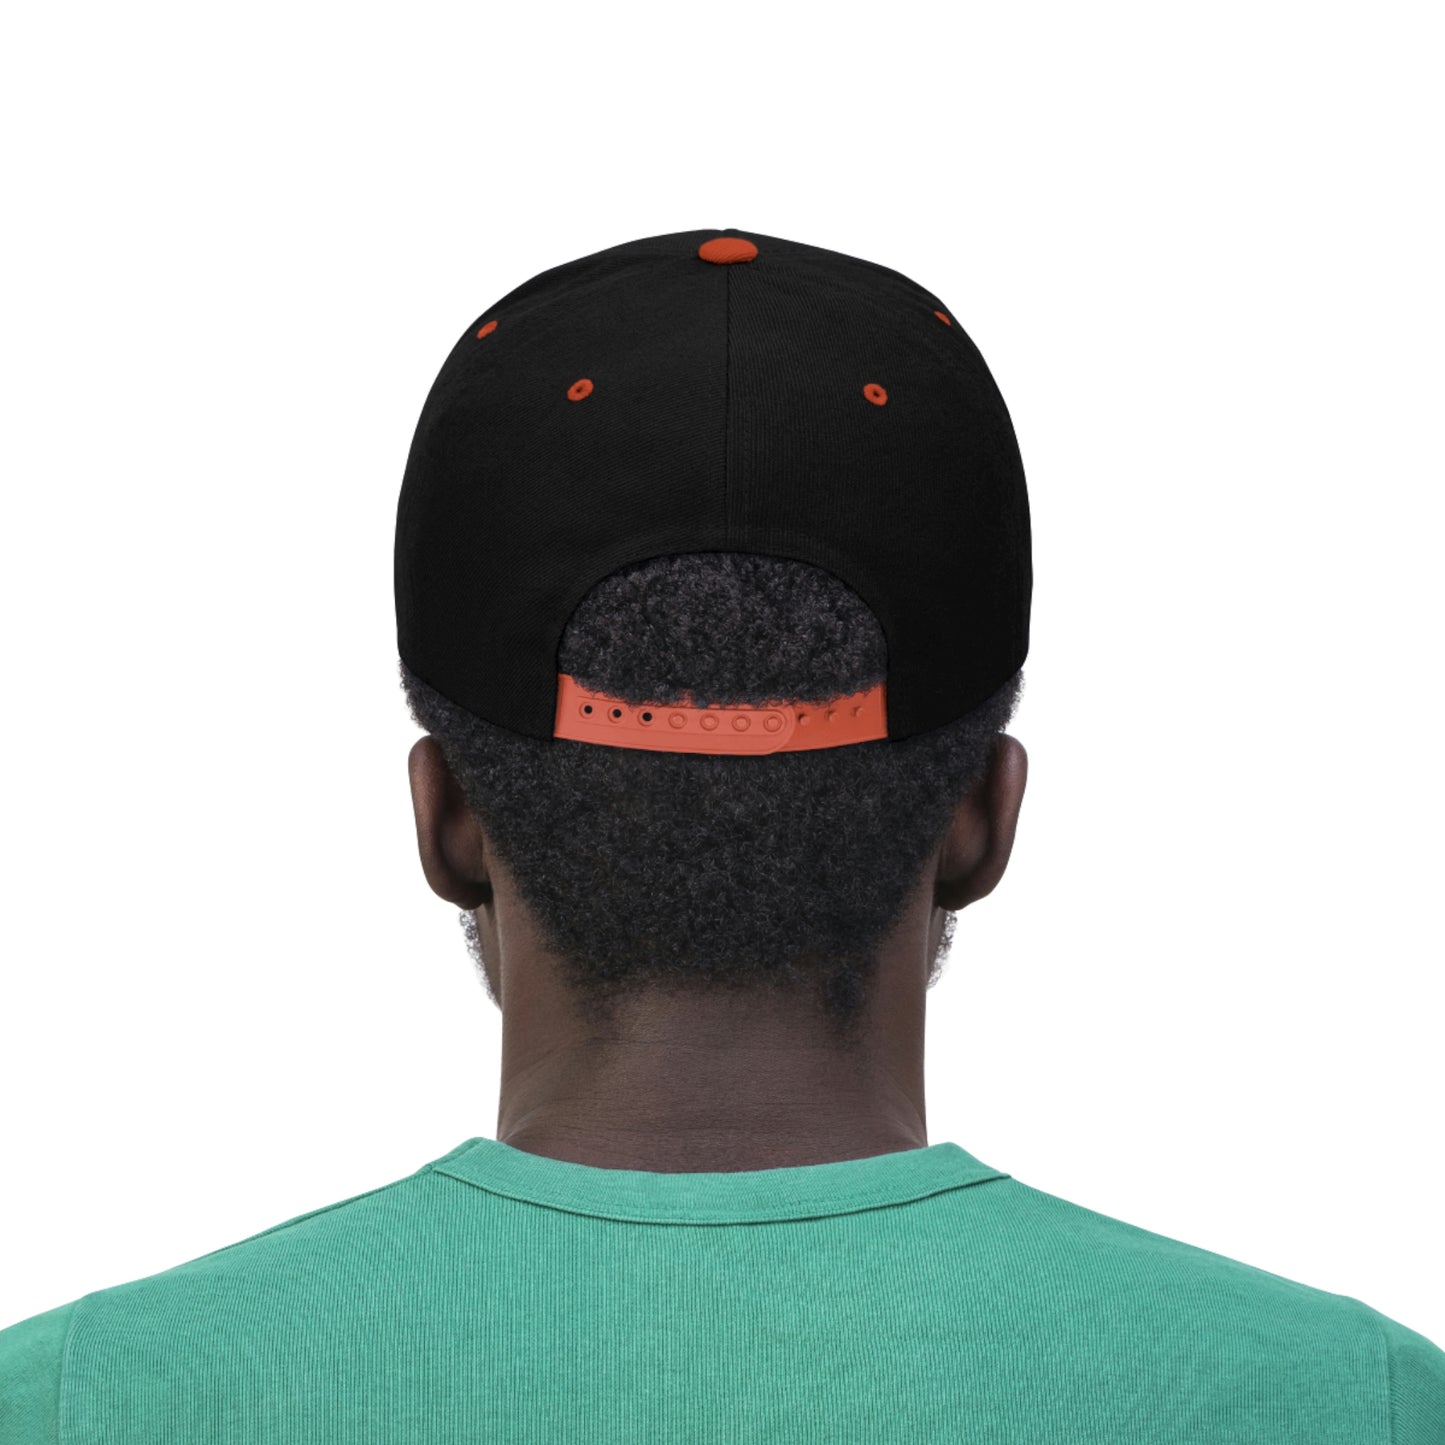 The back of the Warm Cannabis Paradise Snapback Hat in the orange and black color scheme